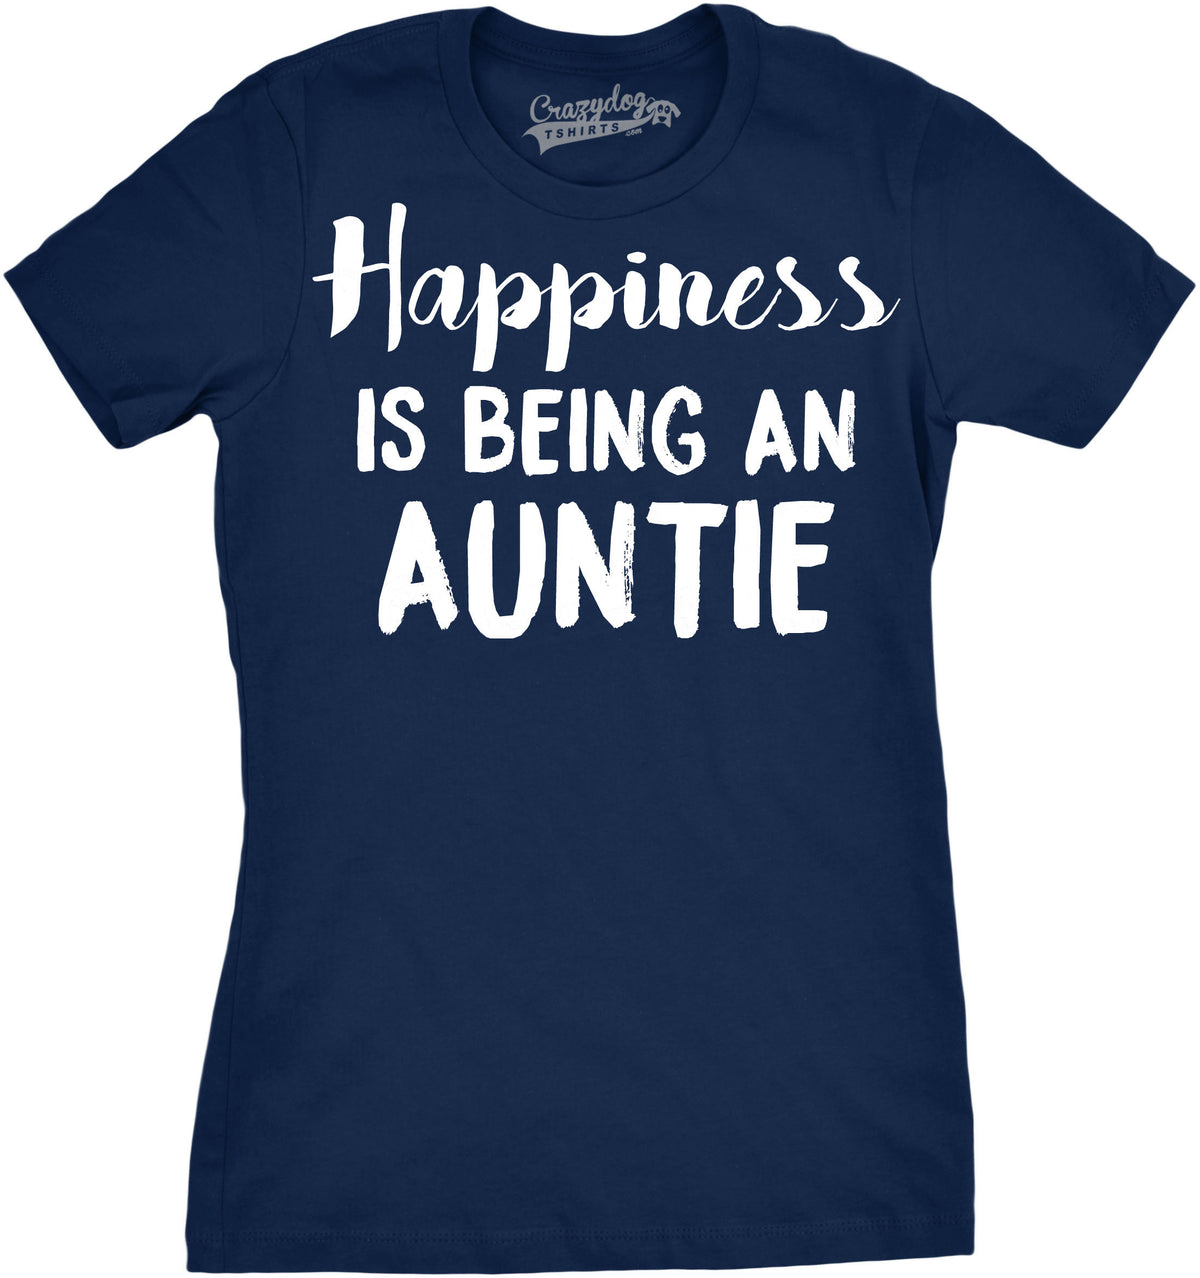 Funny Navy Happiness is Being an Auntie Womens T Shirt Nerdy Aunt Tee